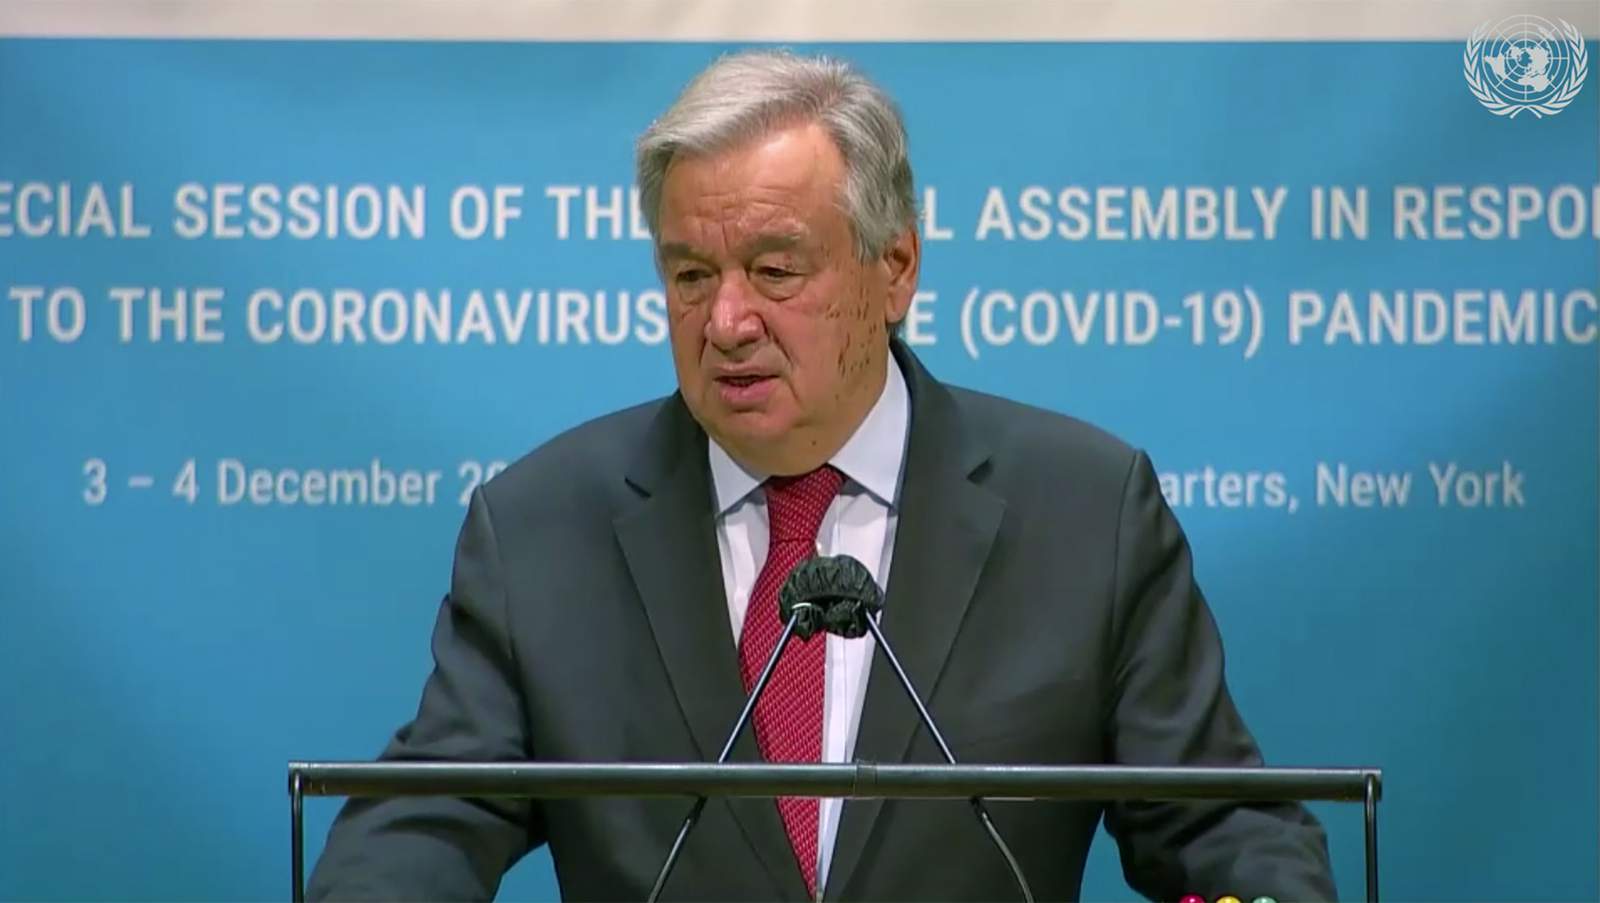 UN chief: Vaccine can't undo damage from global pandemic